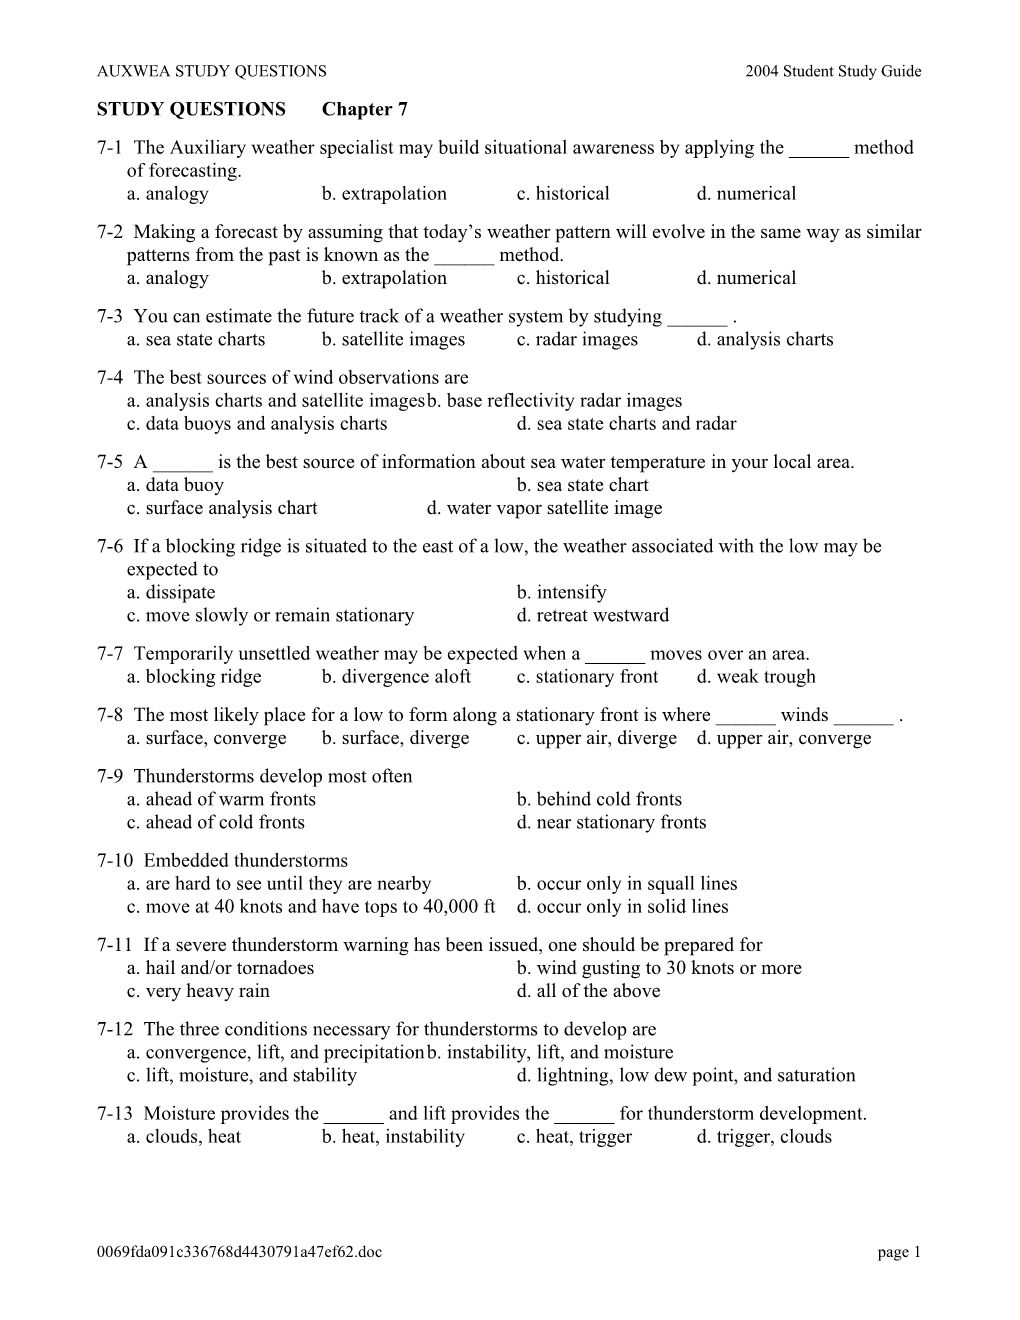 AUXWEA STUDY QUESTIONS 2004 Student Study Guide